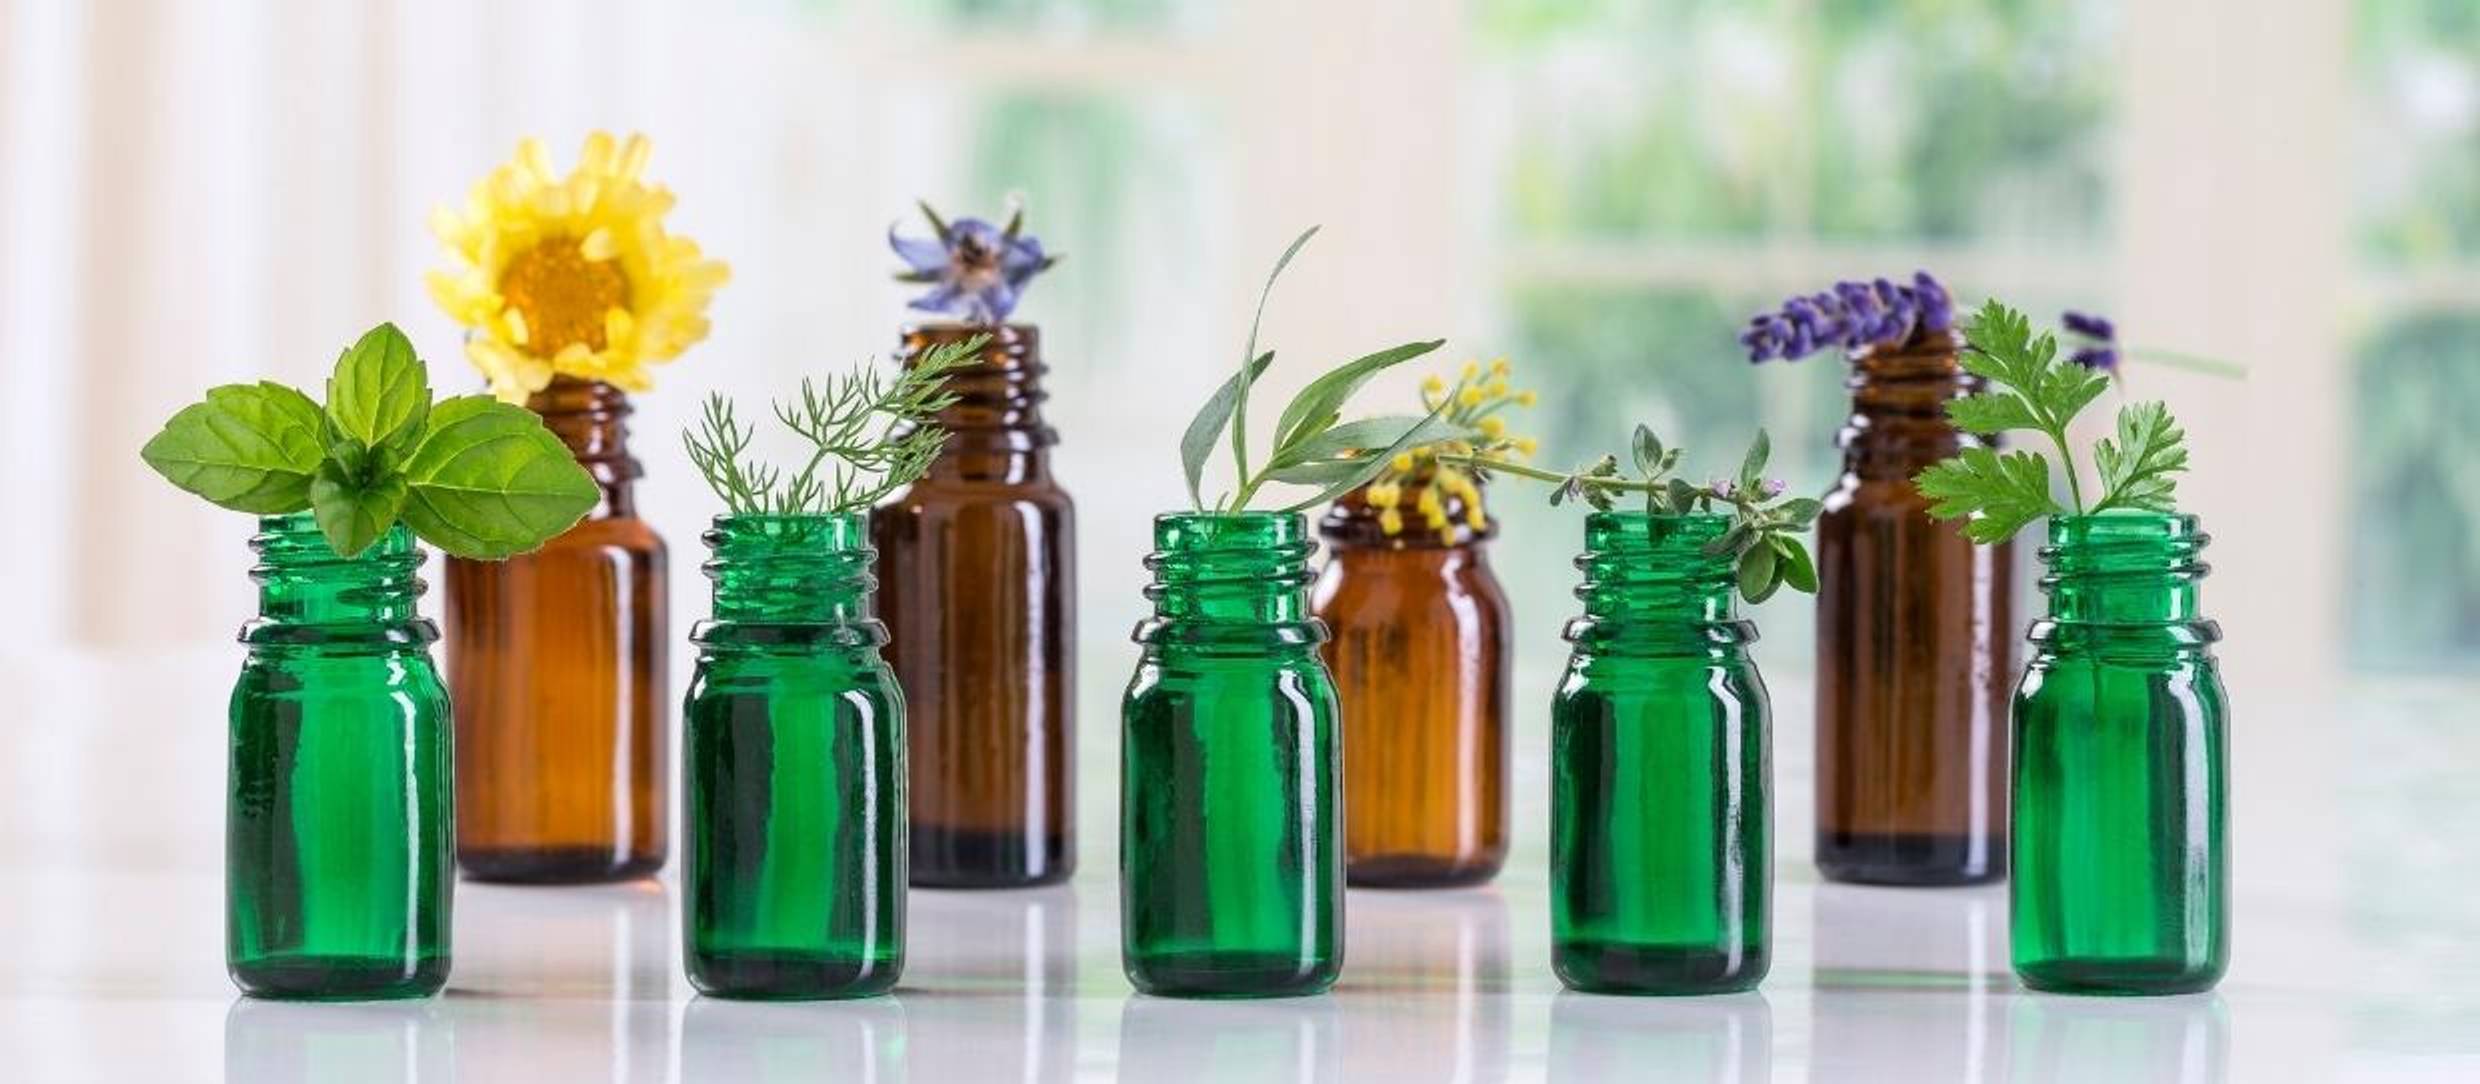 How to use essential oils: a simple guide